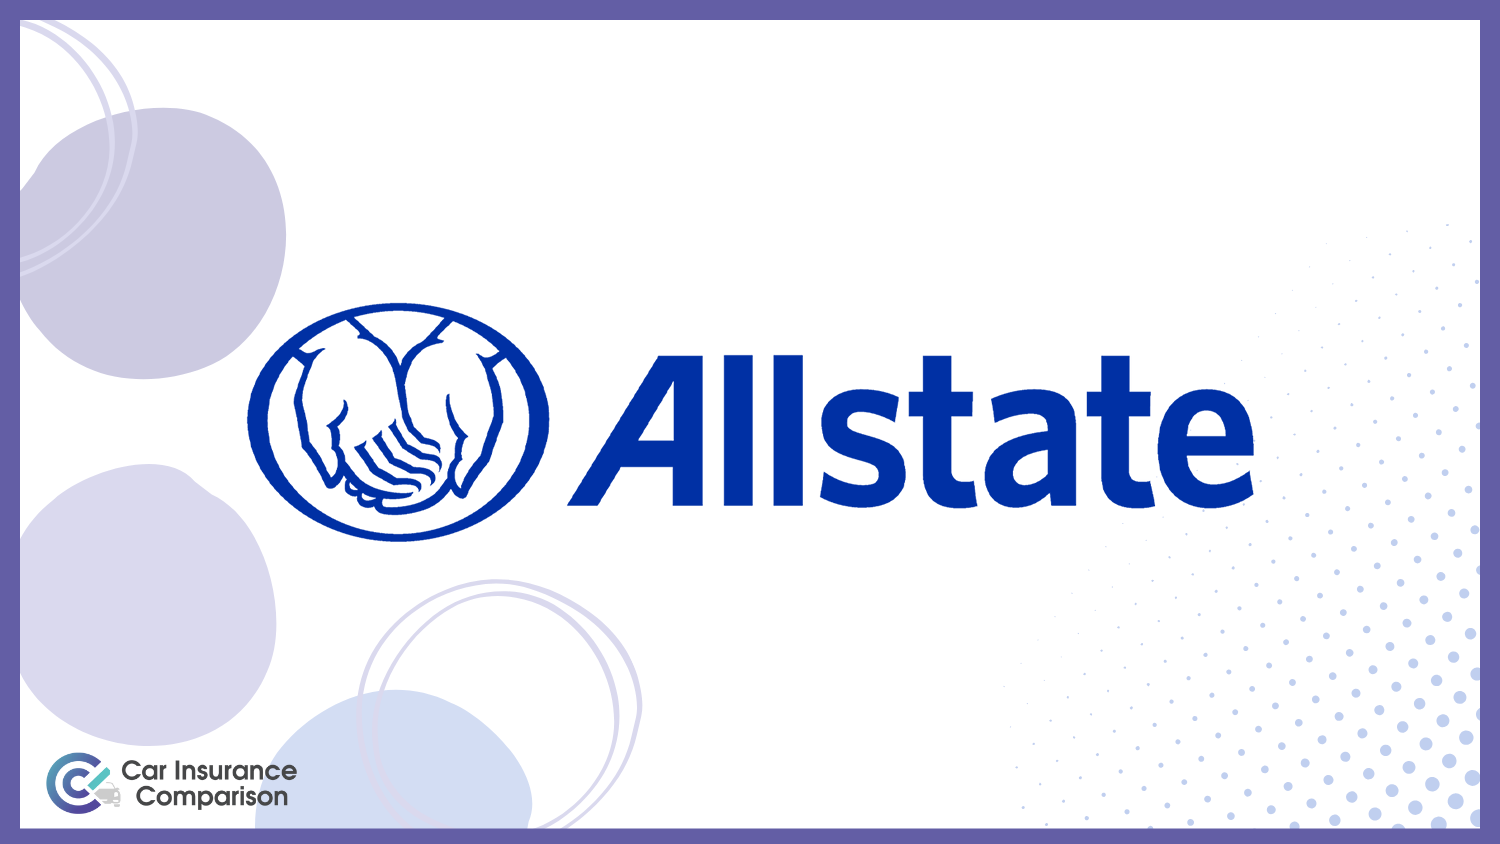 Allstate: Best Car Insurance for Home-Care Worker